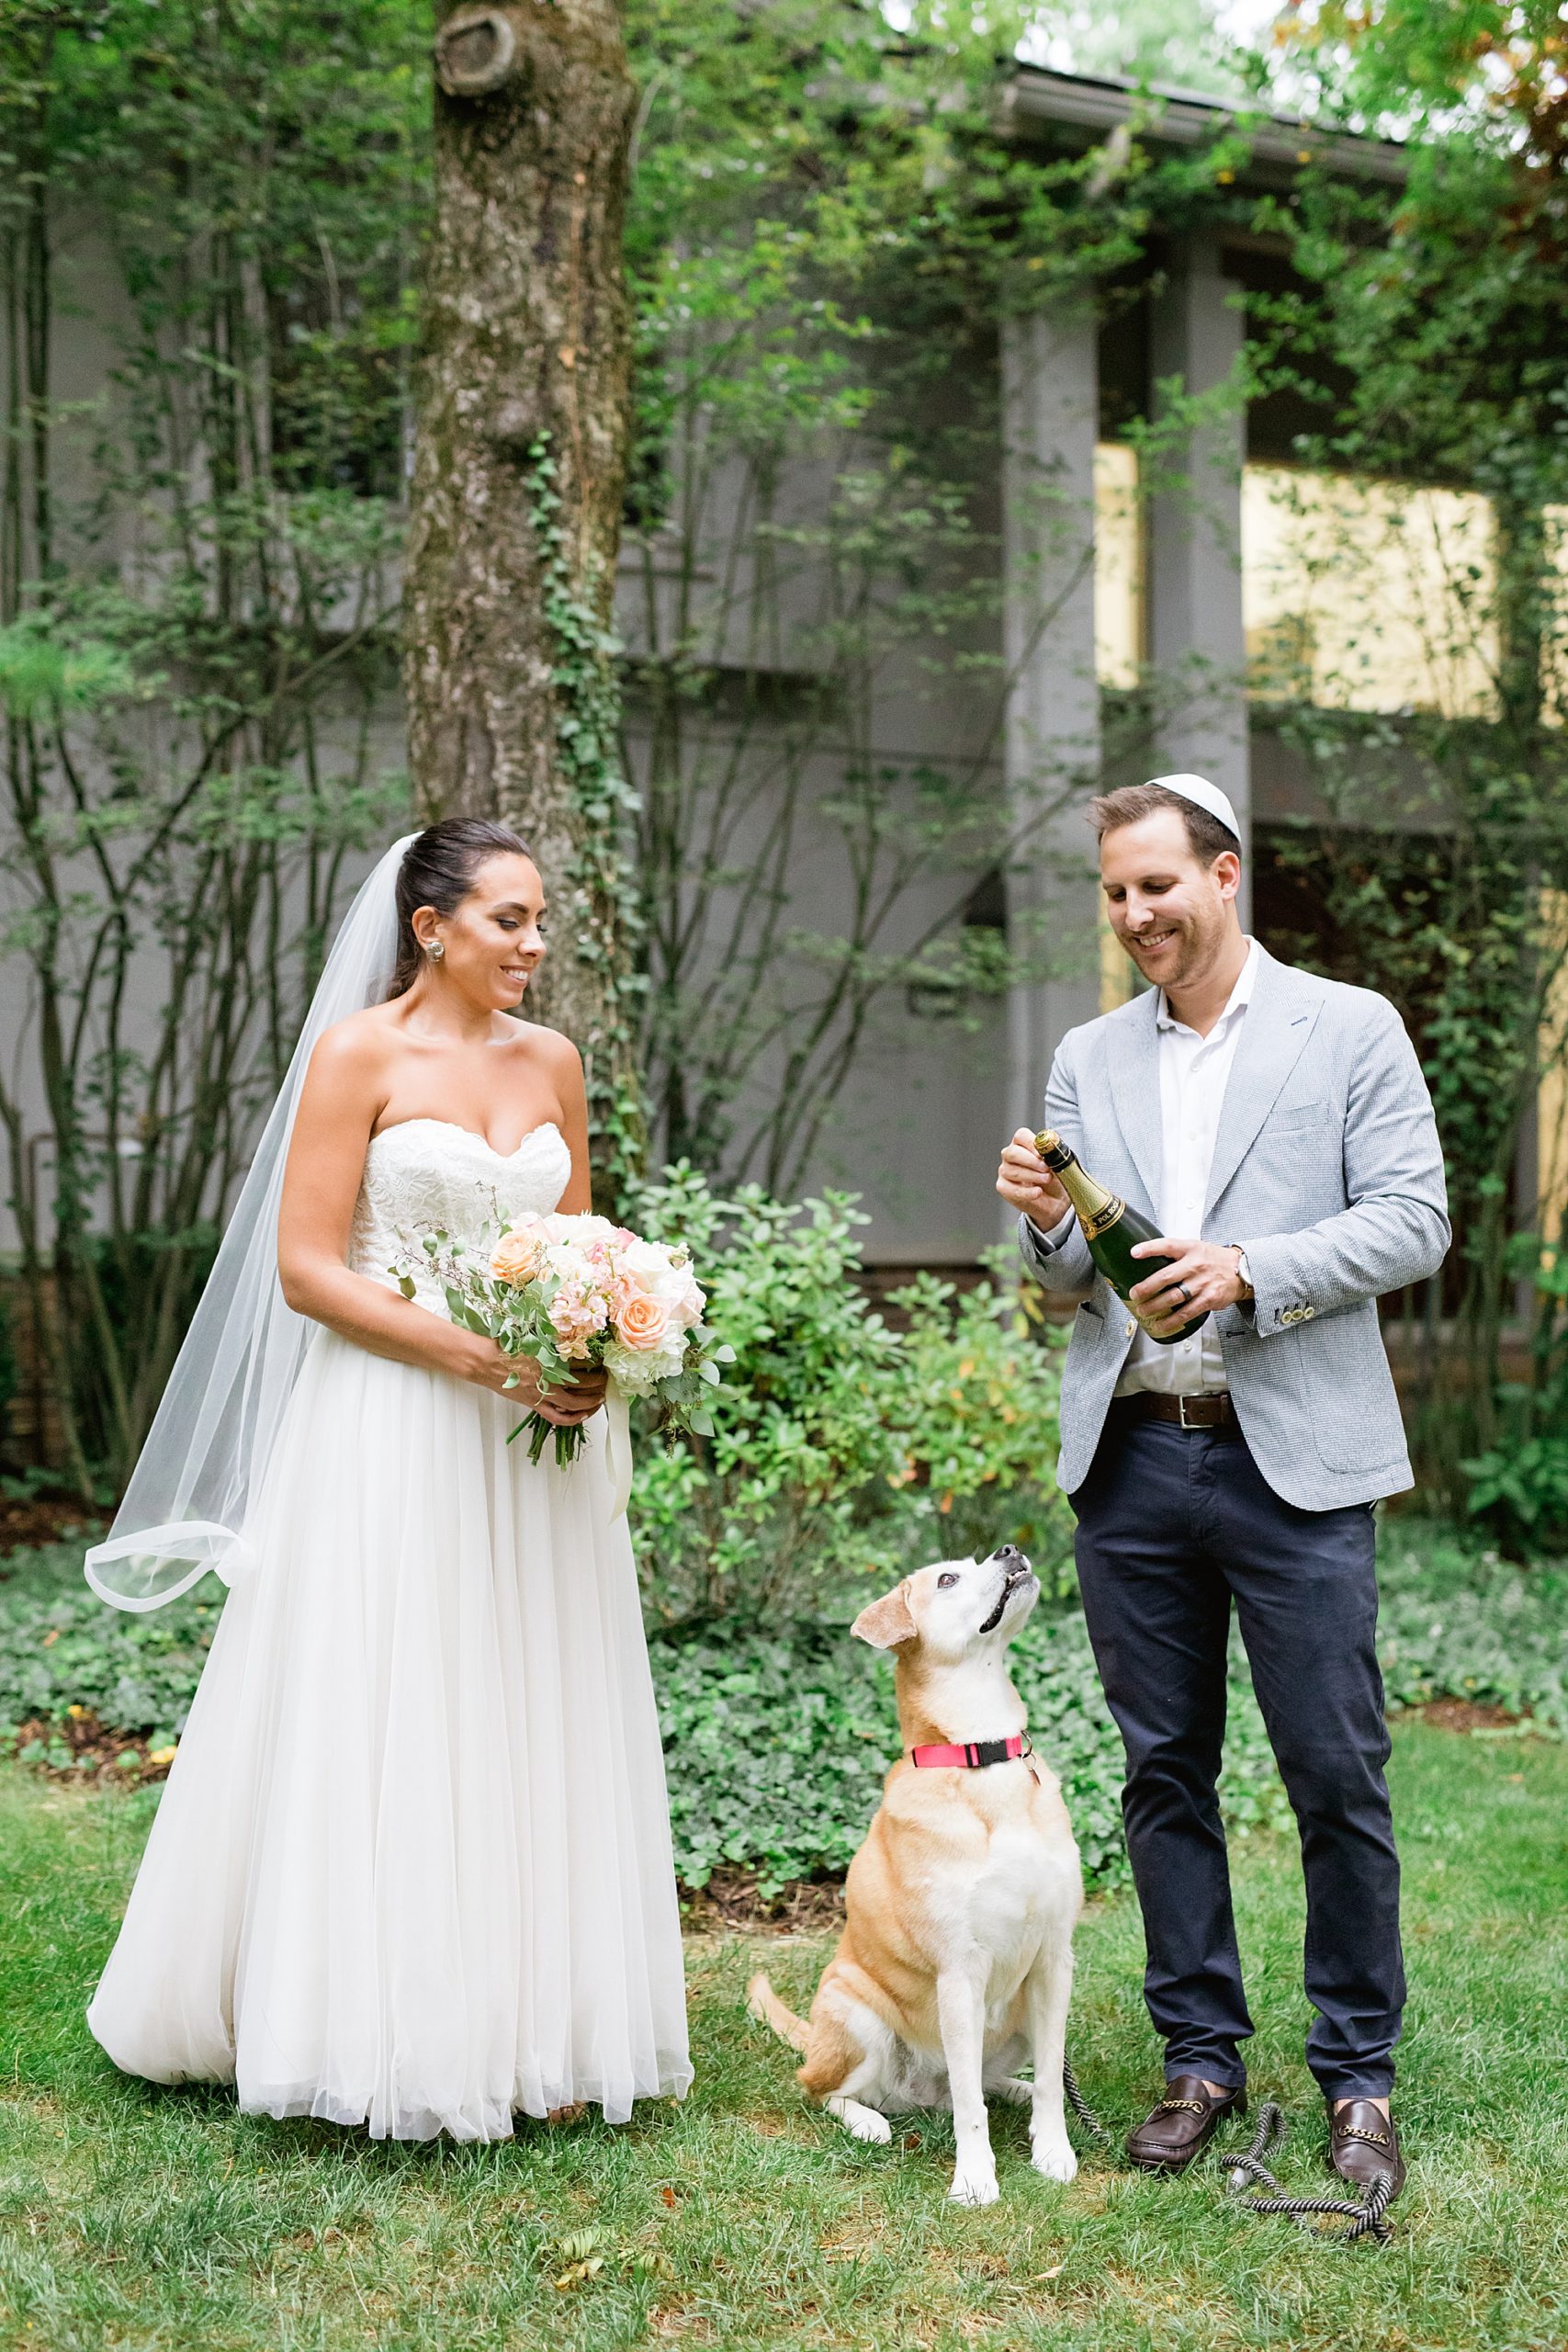 An intimate and heartwarming summer Metro Detroit micro wedding in Birmingham, Michigan by Breanne Rochelle Photography. Breanne is a Michigan based wedding photography available for destination weddings capturing timeless wedding photos for couples in love.